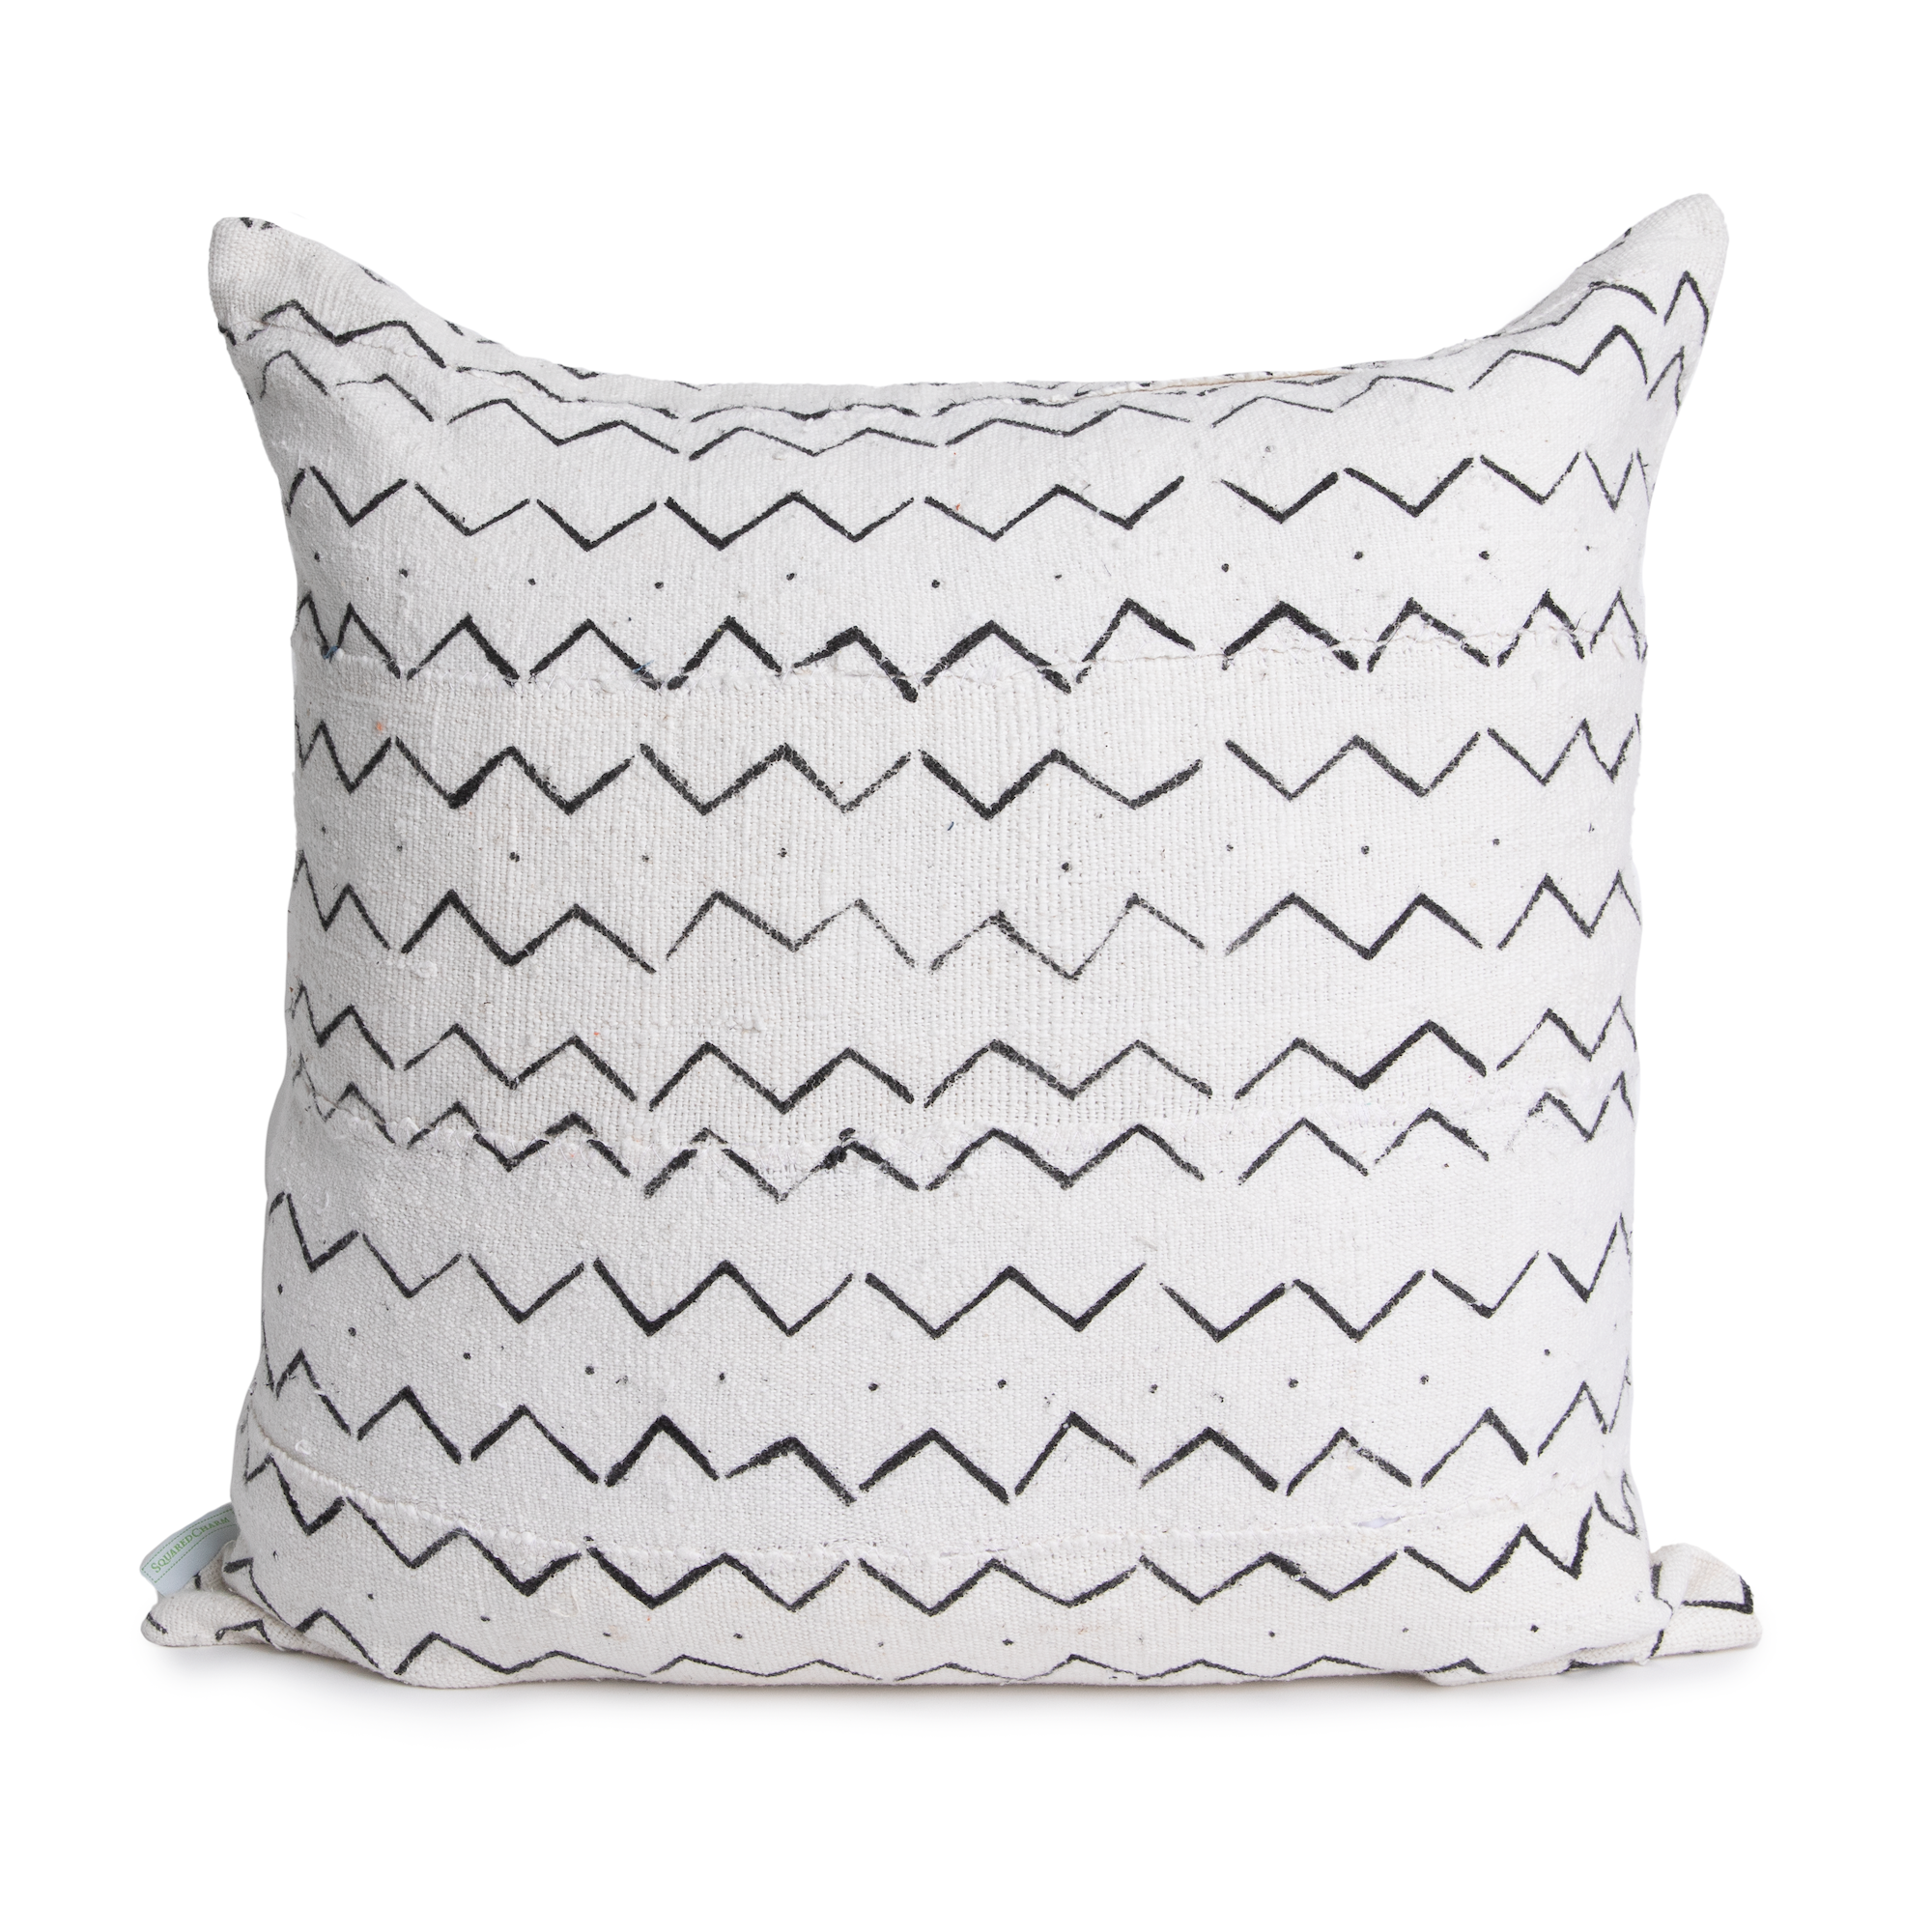 White Mud Cloth Pillow Cover - Tiffany